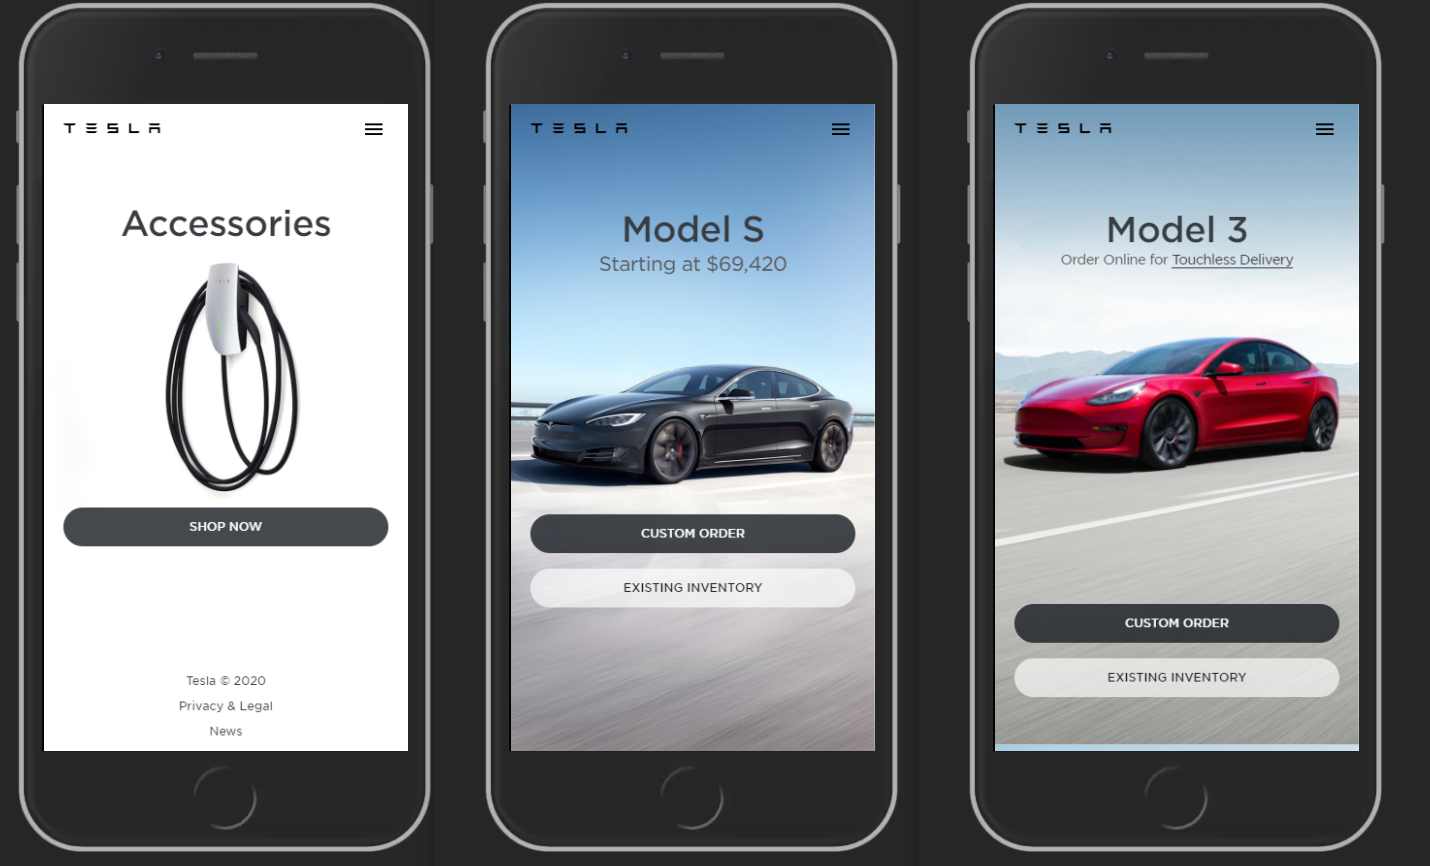 Every product page on tesla.com has customized CTAs that are appealing to the customer.